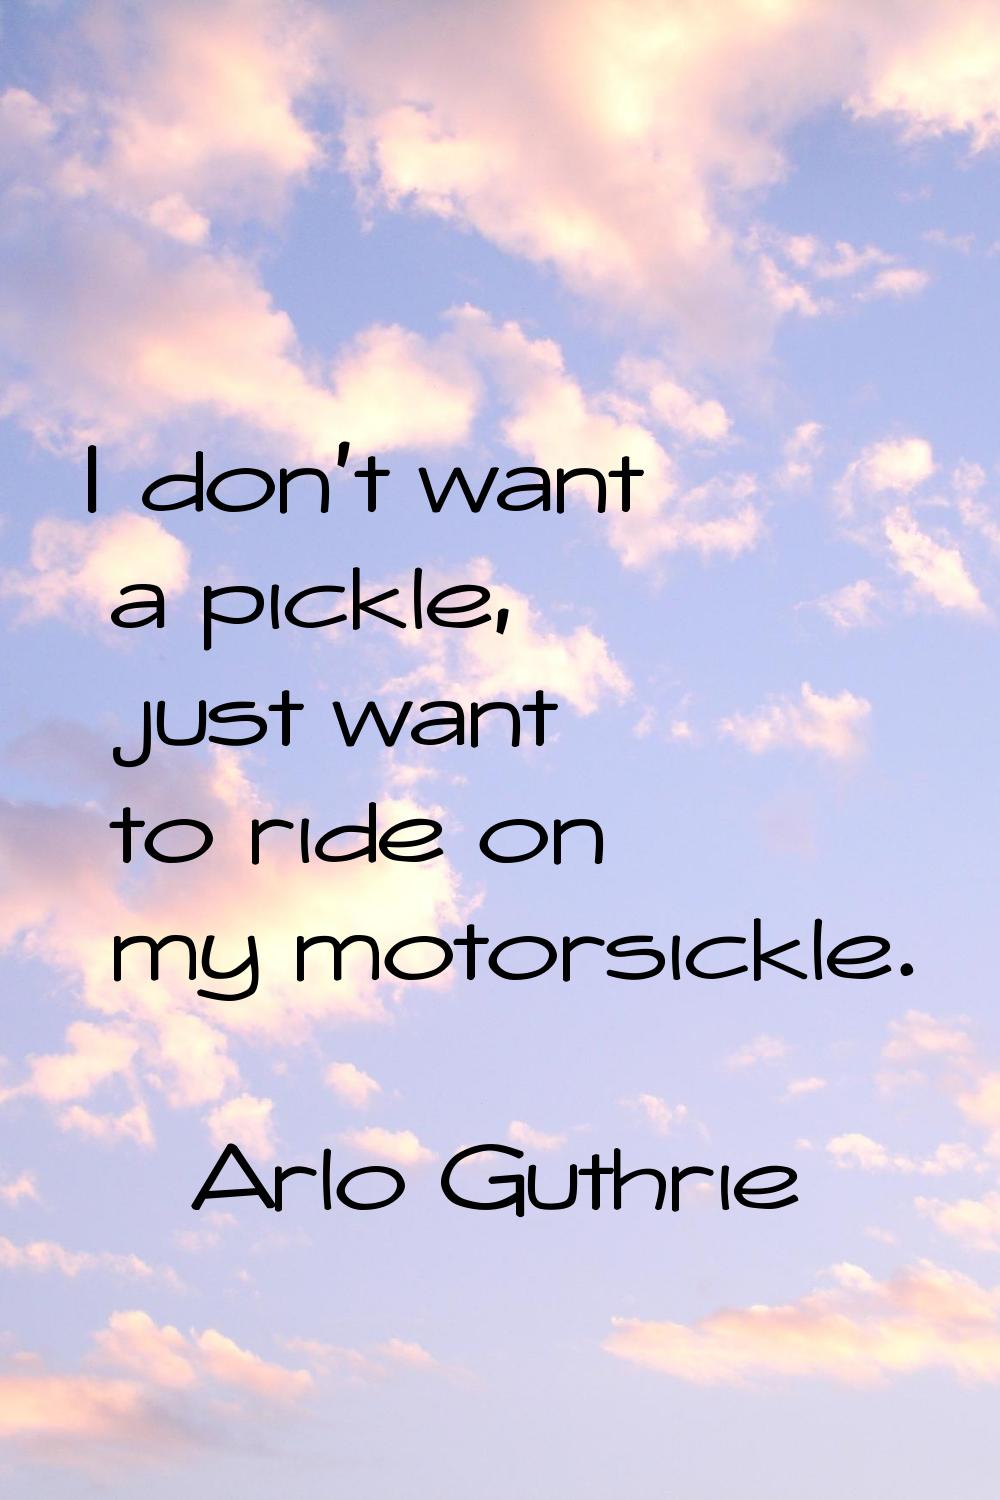 I don't want a pickle, just want to ride on my motorsickle.